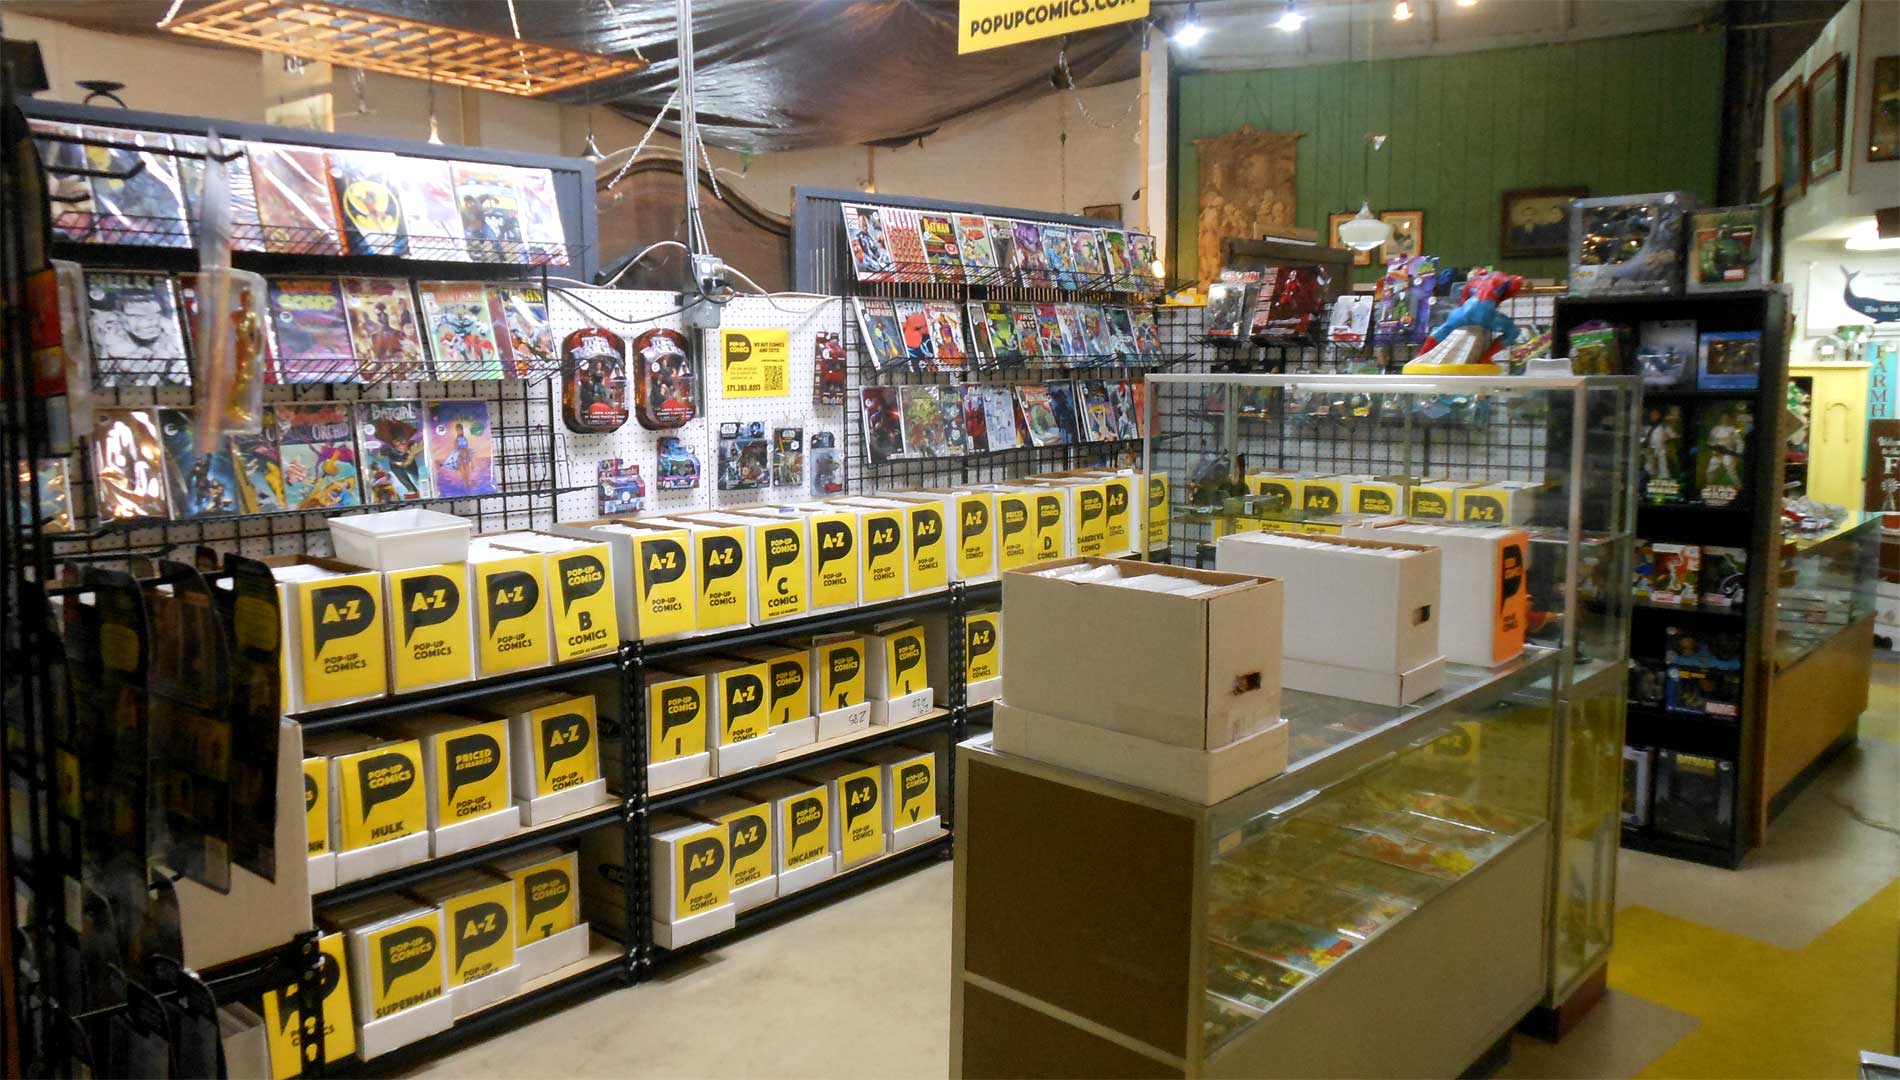 The largest comic book collection in N. VA